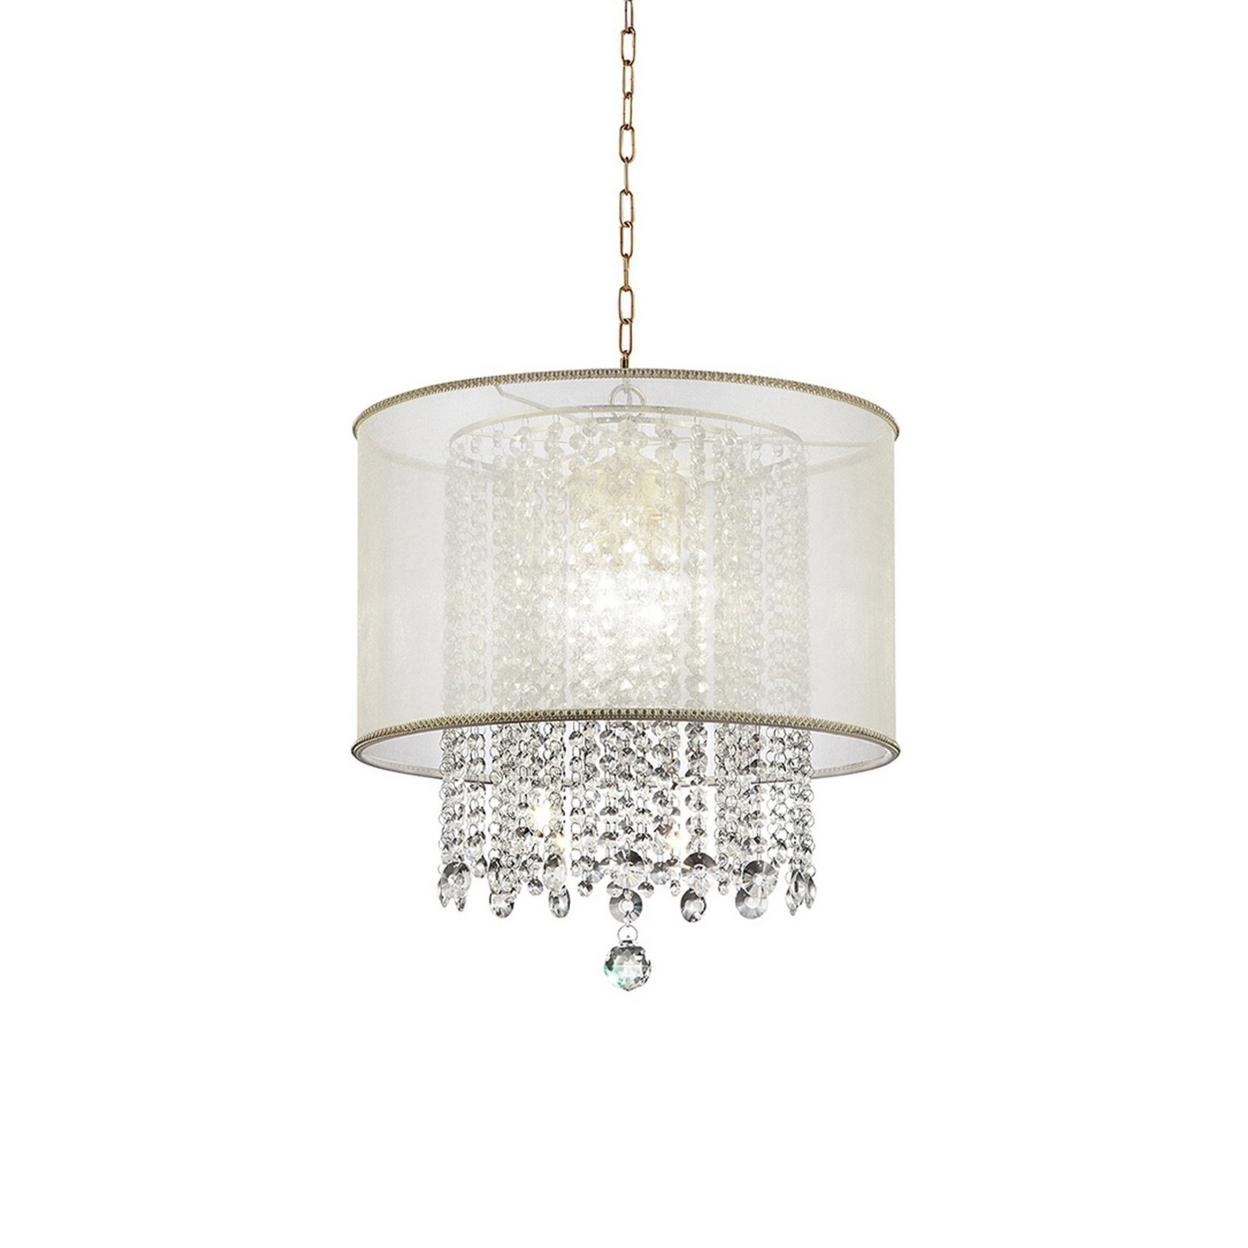 Ceiling Lamp With Hanging Crystal Accents, White And Clear- Saltoro Sherpi